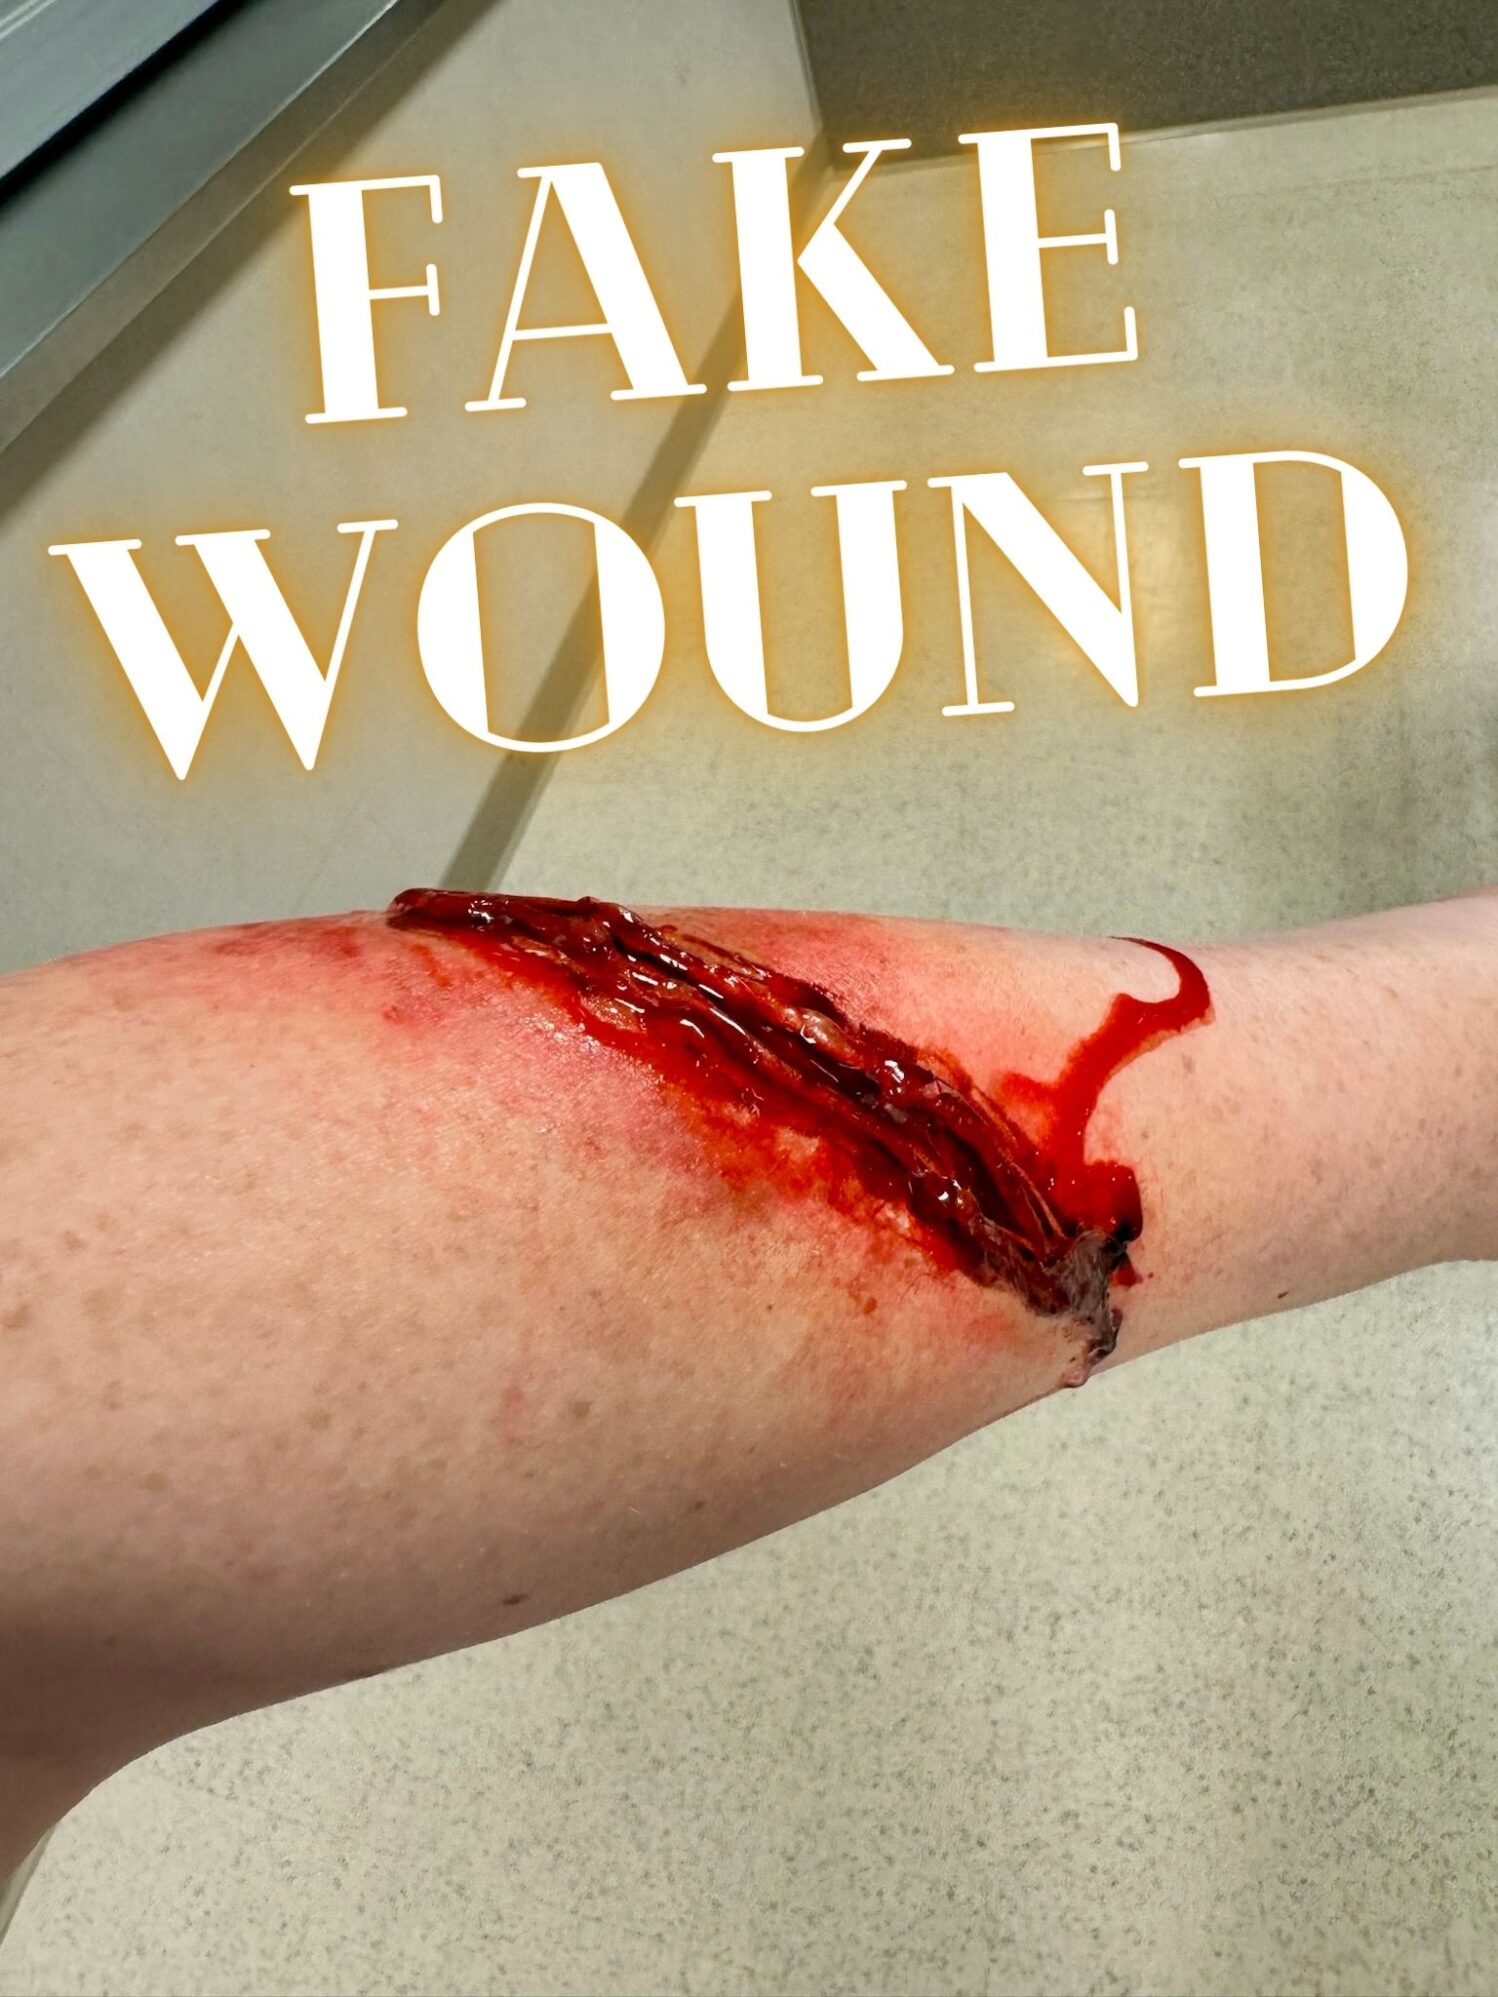 A view of Emma's stage wound. Text identifies it as a fake wound.